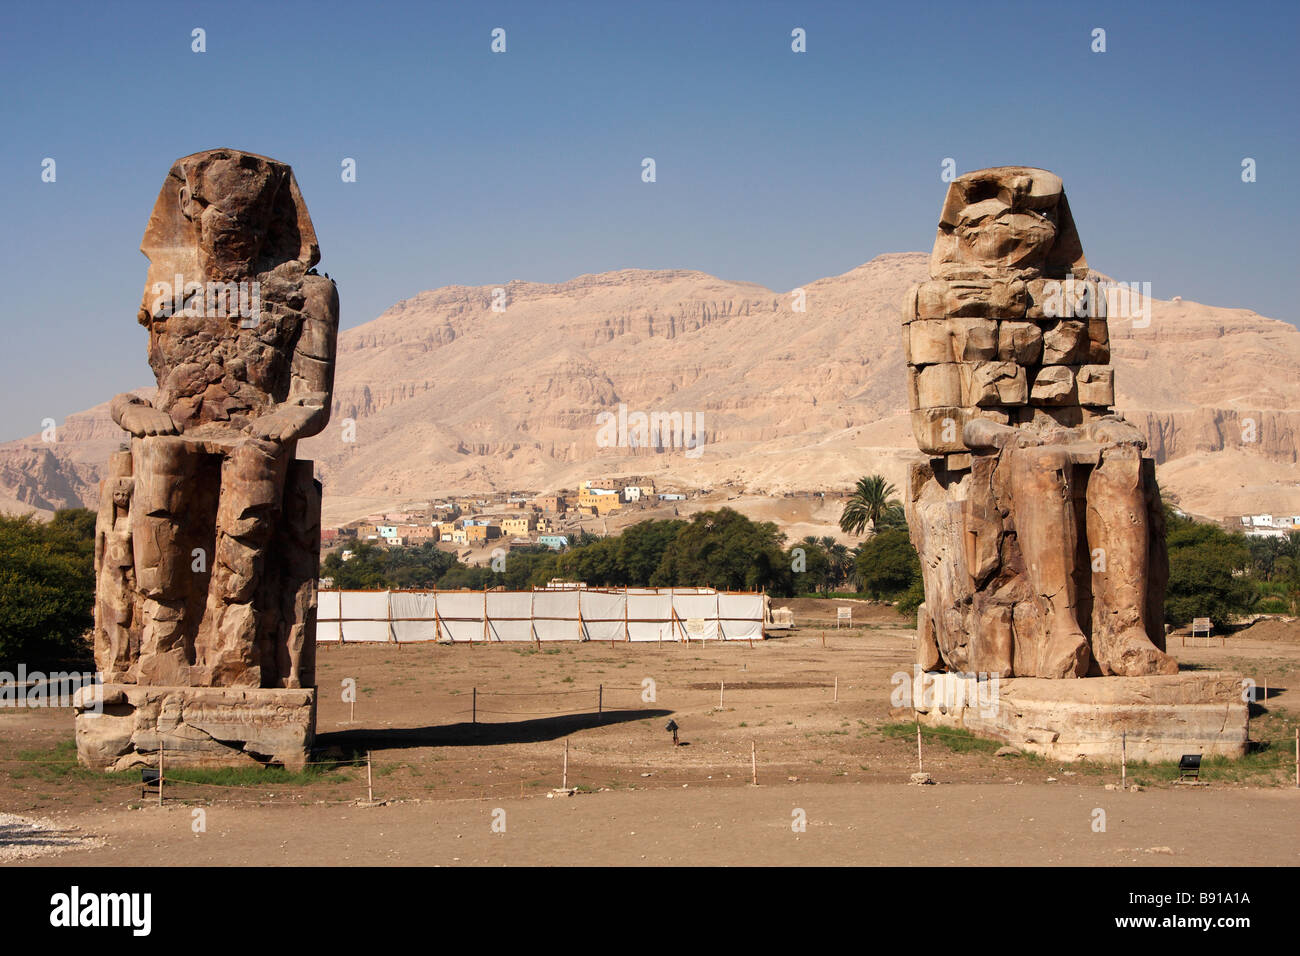 Colossi of Memnon, massive stone statues of Pharaoh Amenhotep III, "West Bank", Luxor, Egypt, [North Africa] Stock Photo